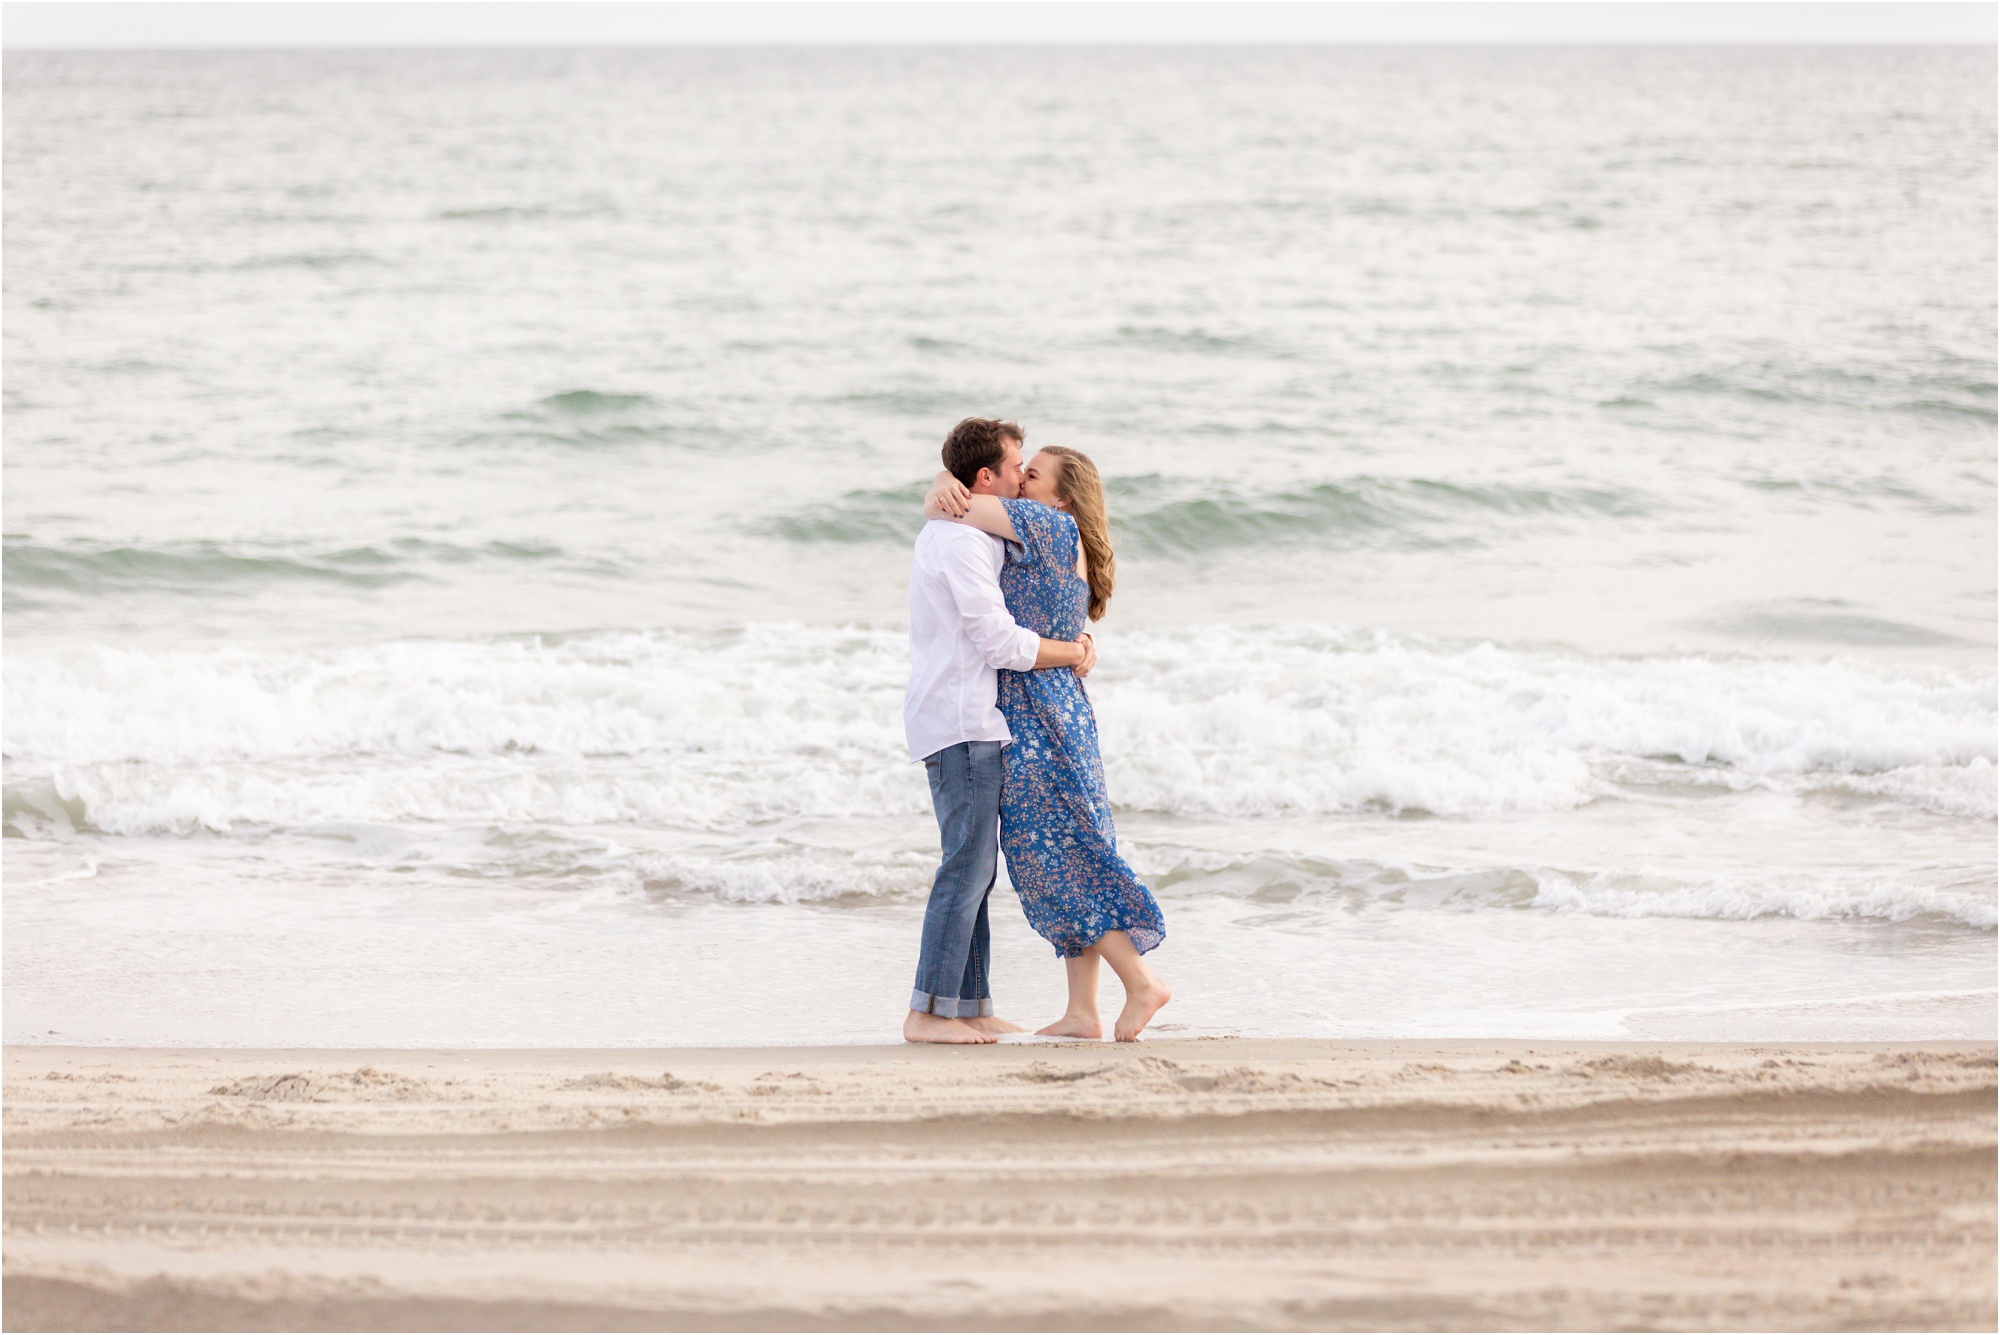 Three ideas for planning your surprise beach proposal